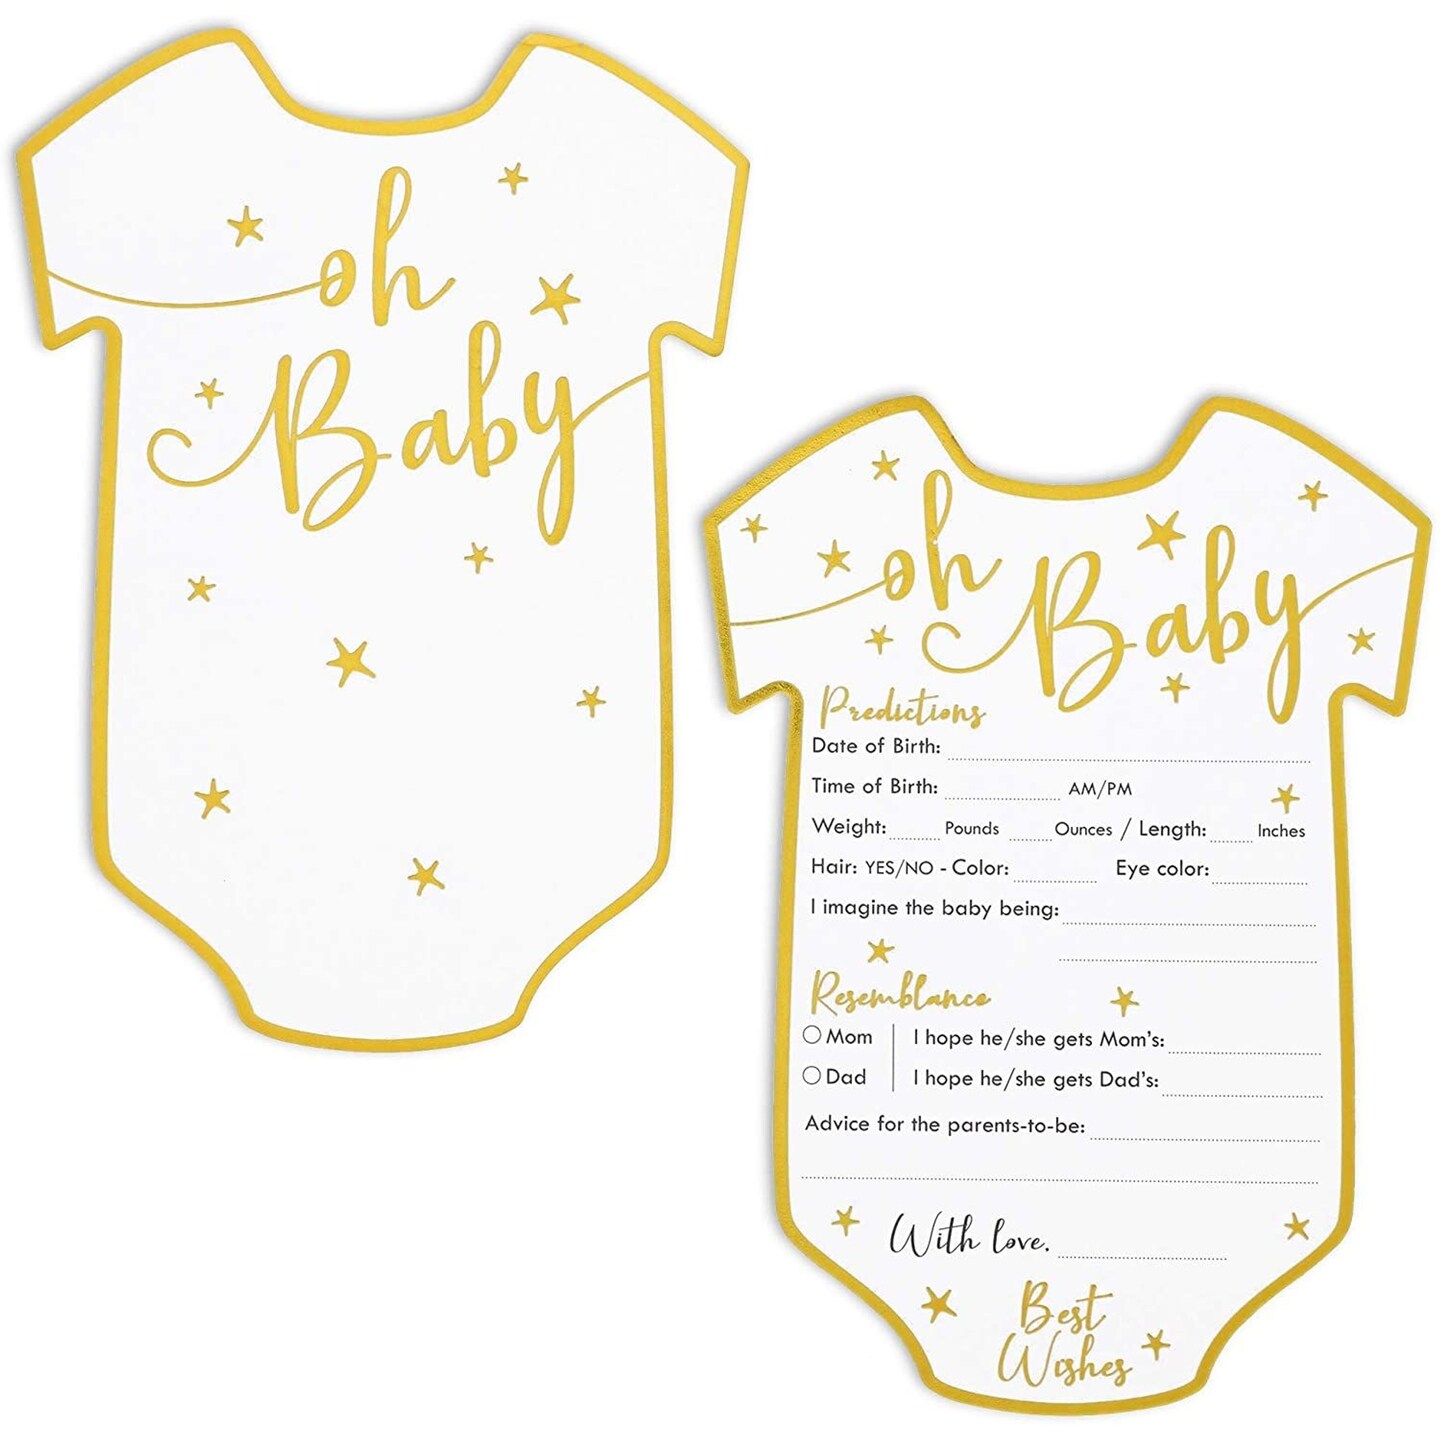 Baby Shower Predictions and Advice Cards, 50 Pack, Gold Foil, 5 x 7 in